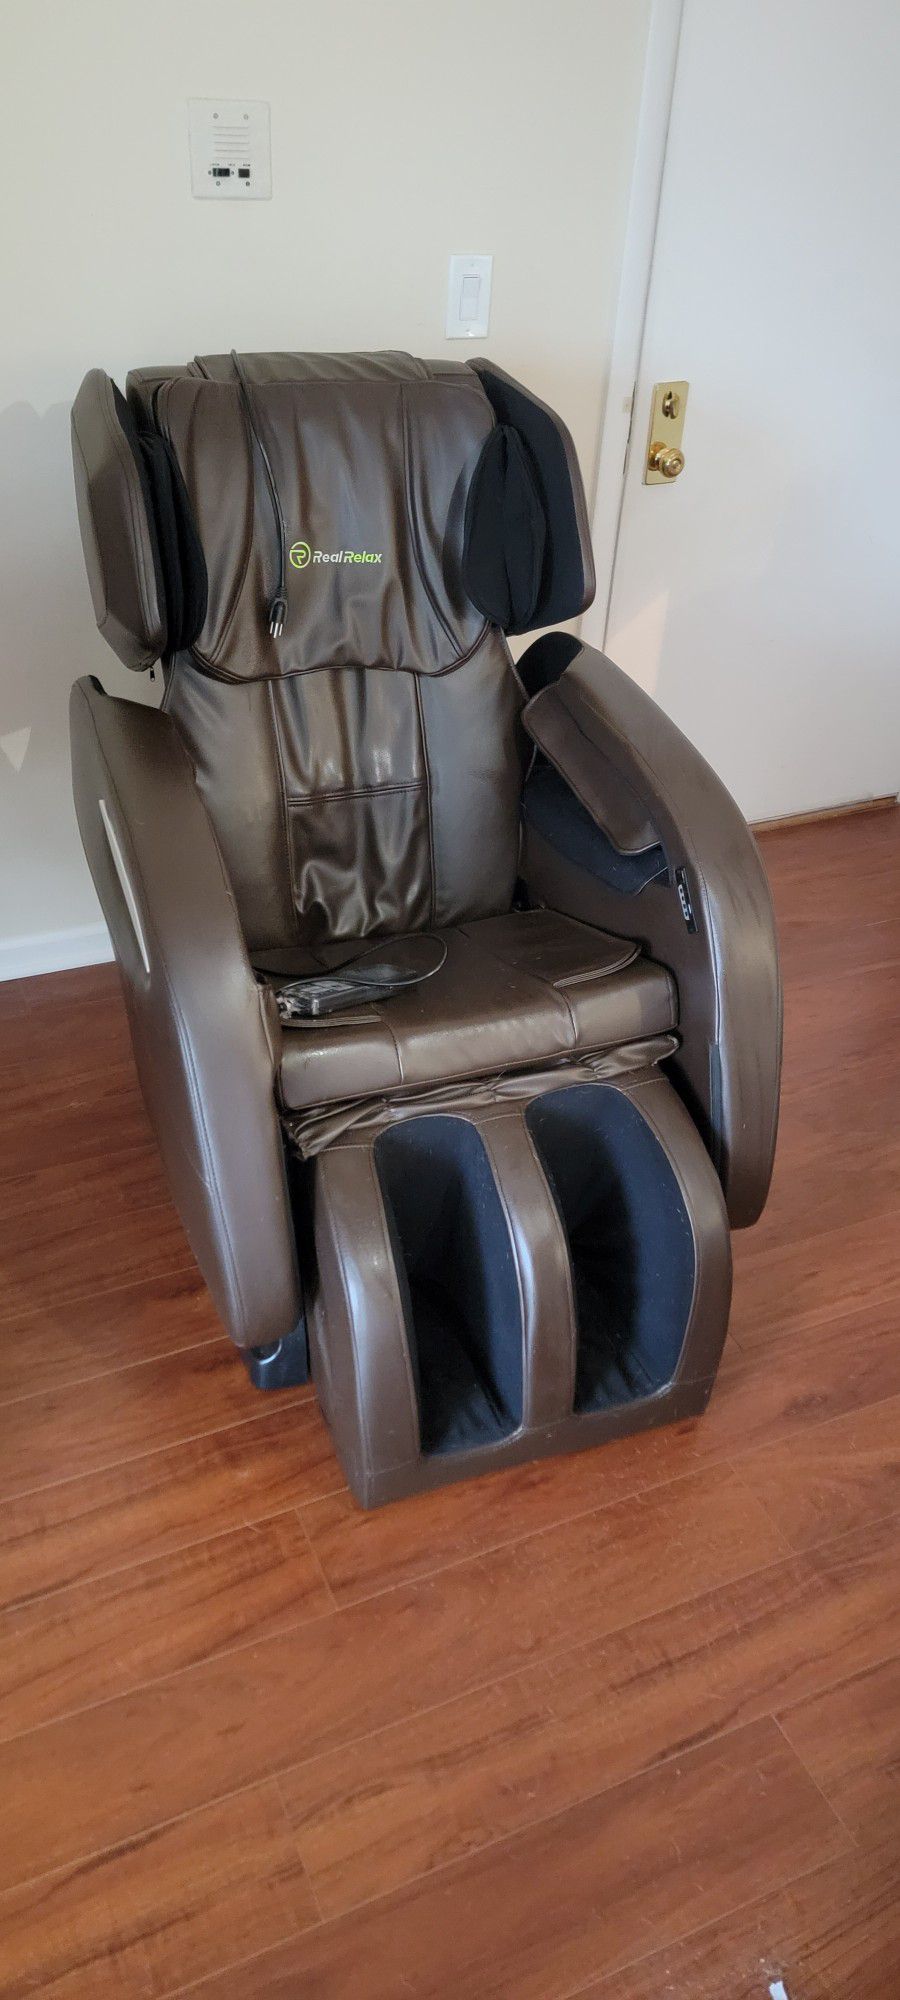 RealRelax Massage Chair Great Condition!